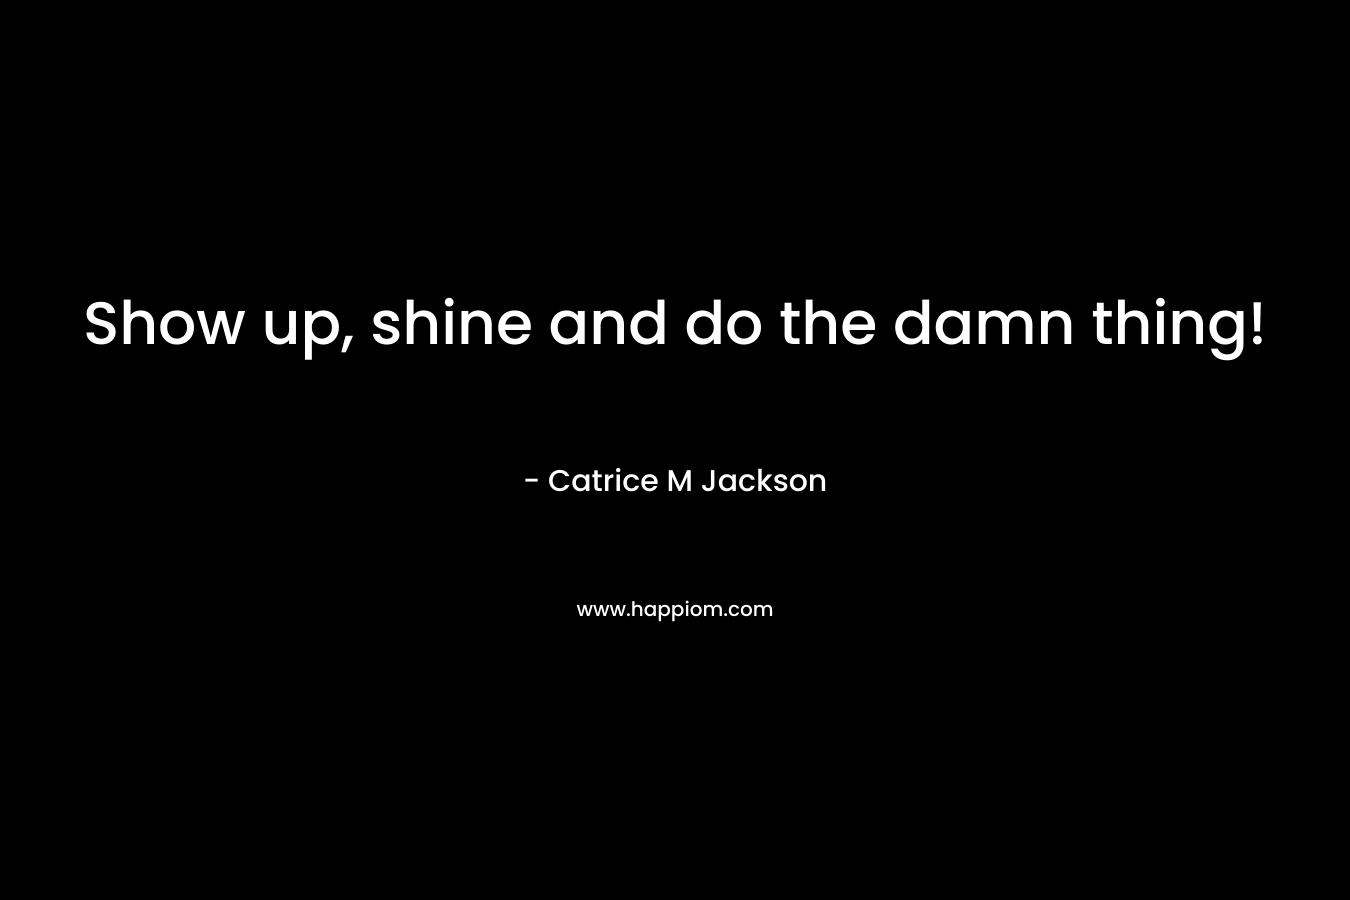 Show up, shine and do the damn thing!